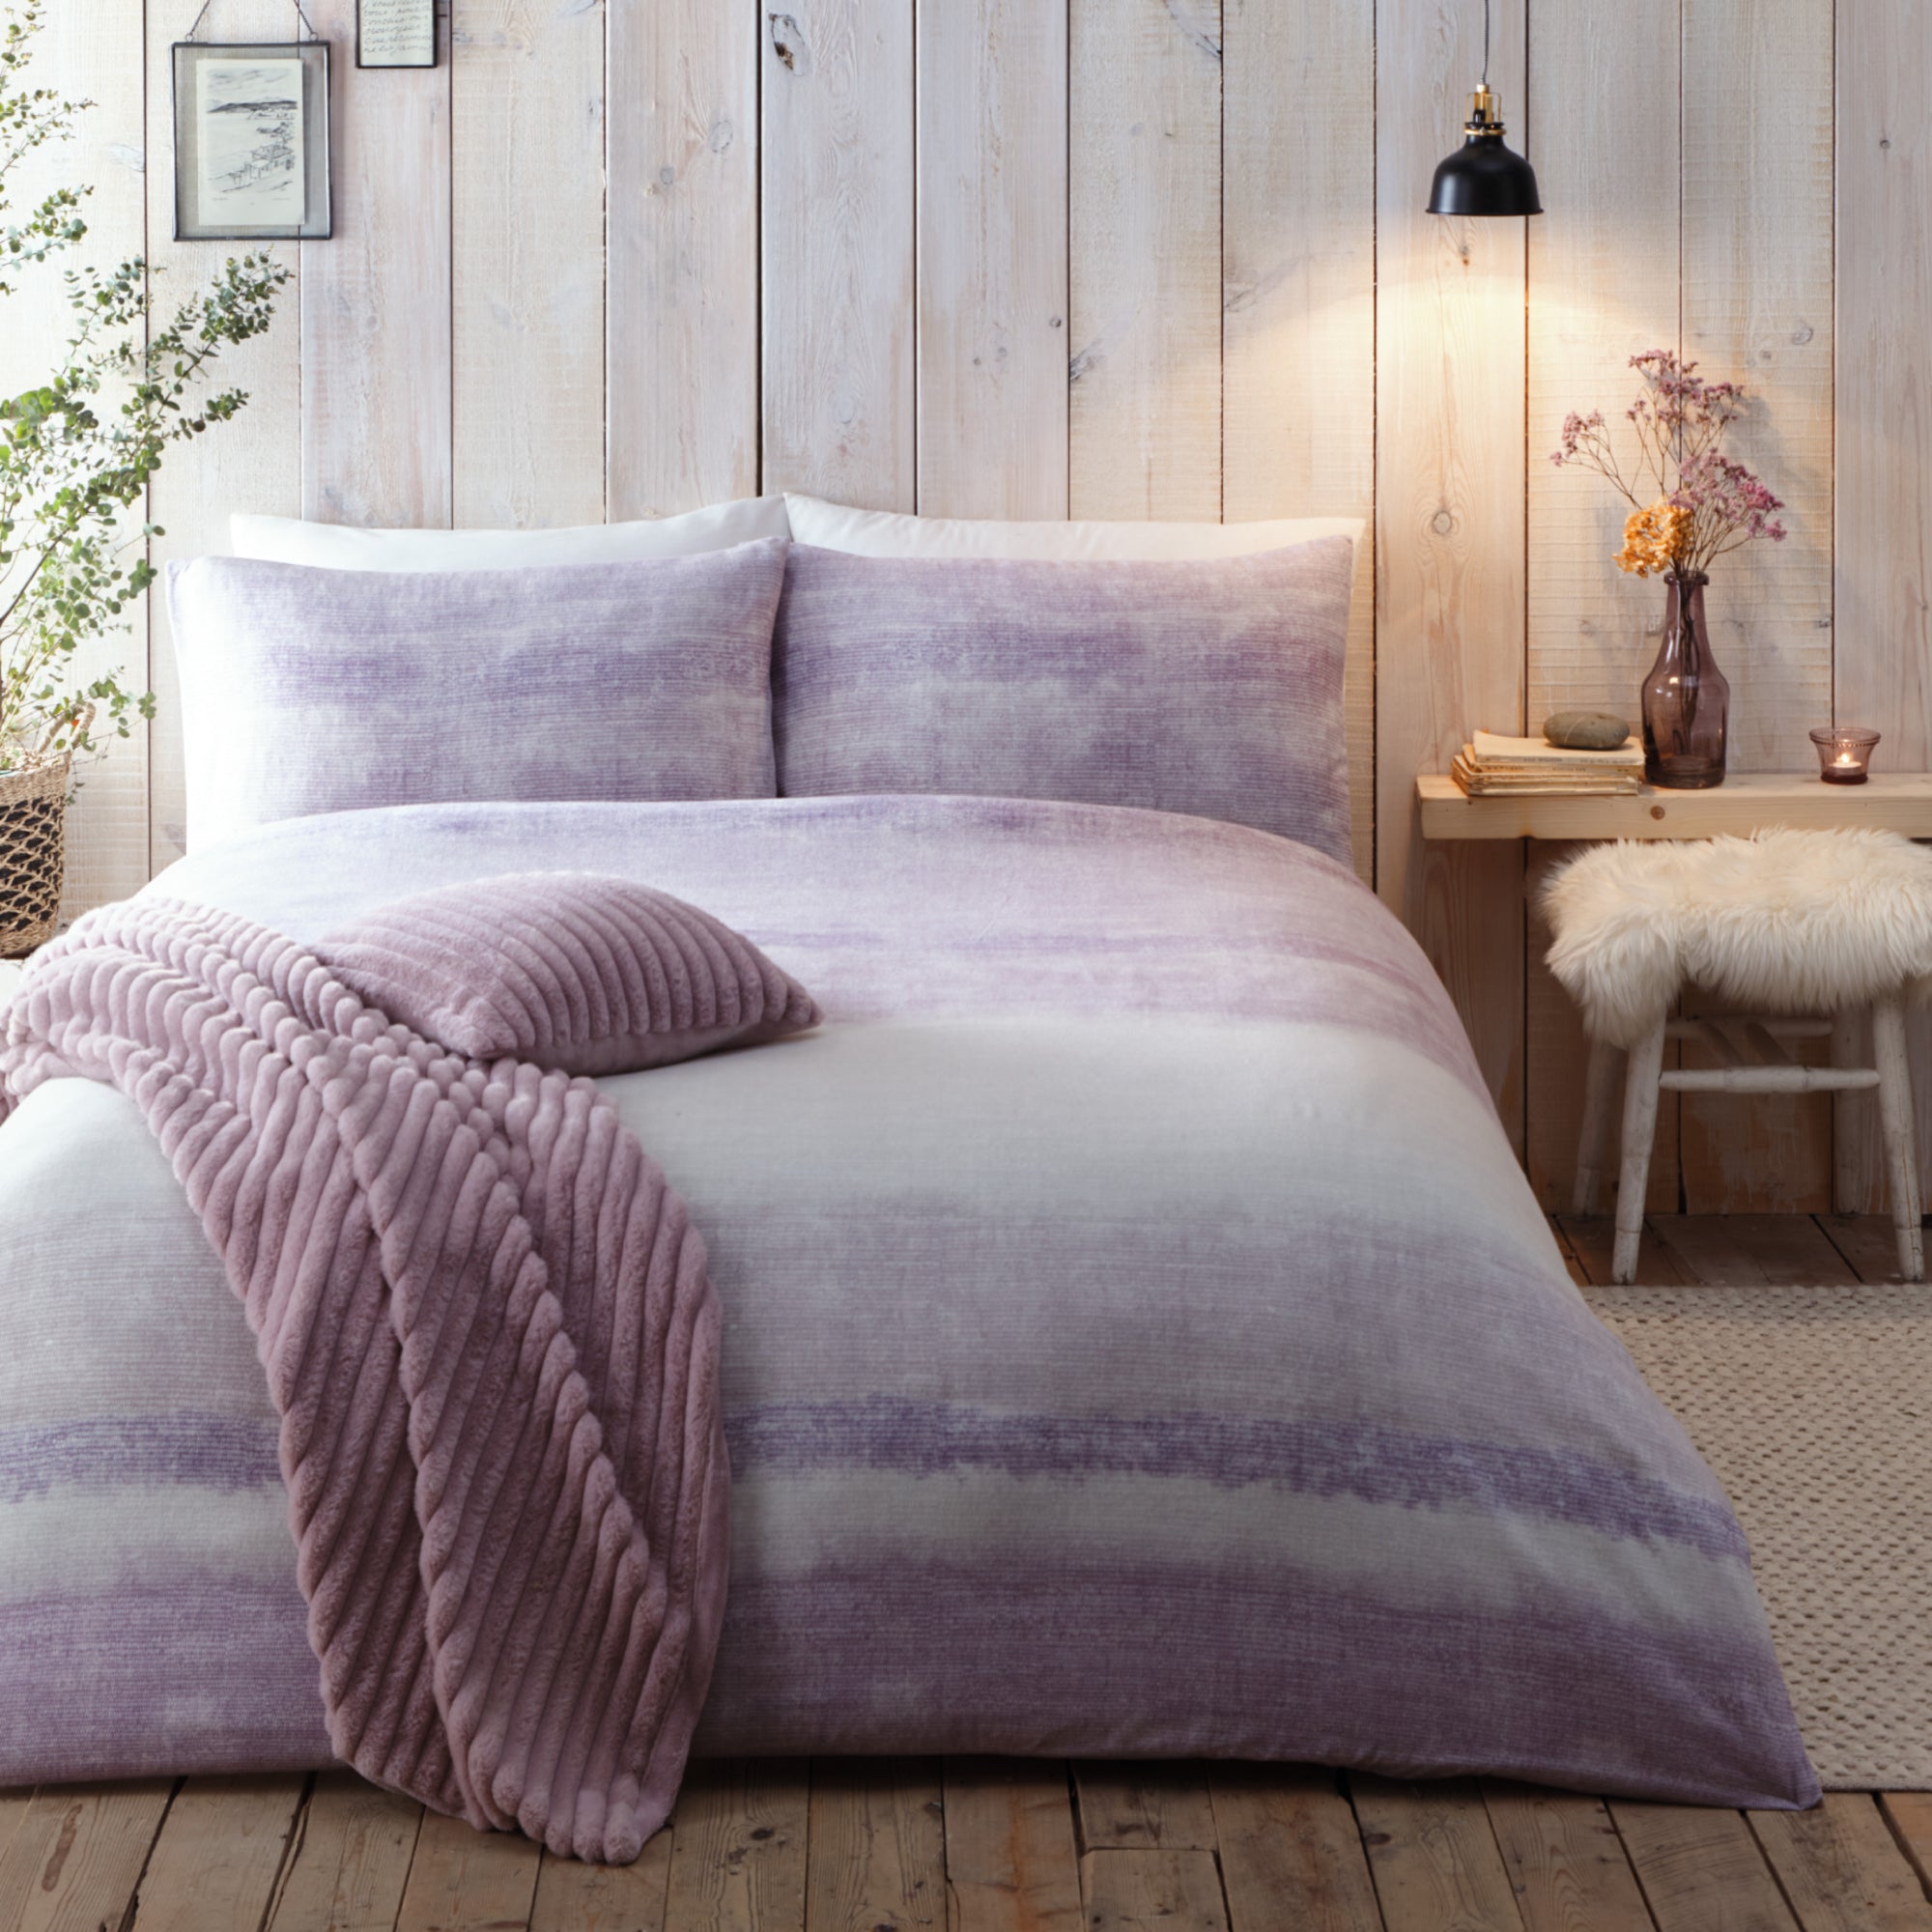 Duvet Cover Set Anson Stripe by Appletree Hygge in Mauve